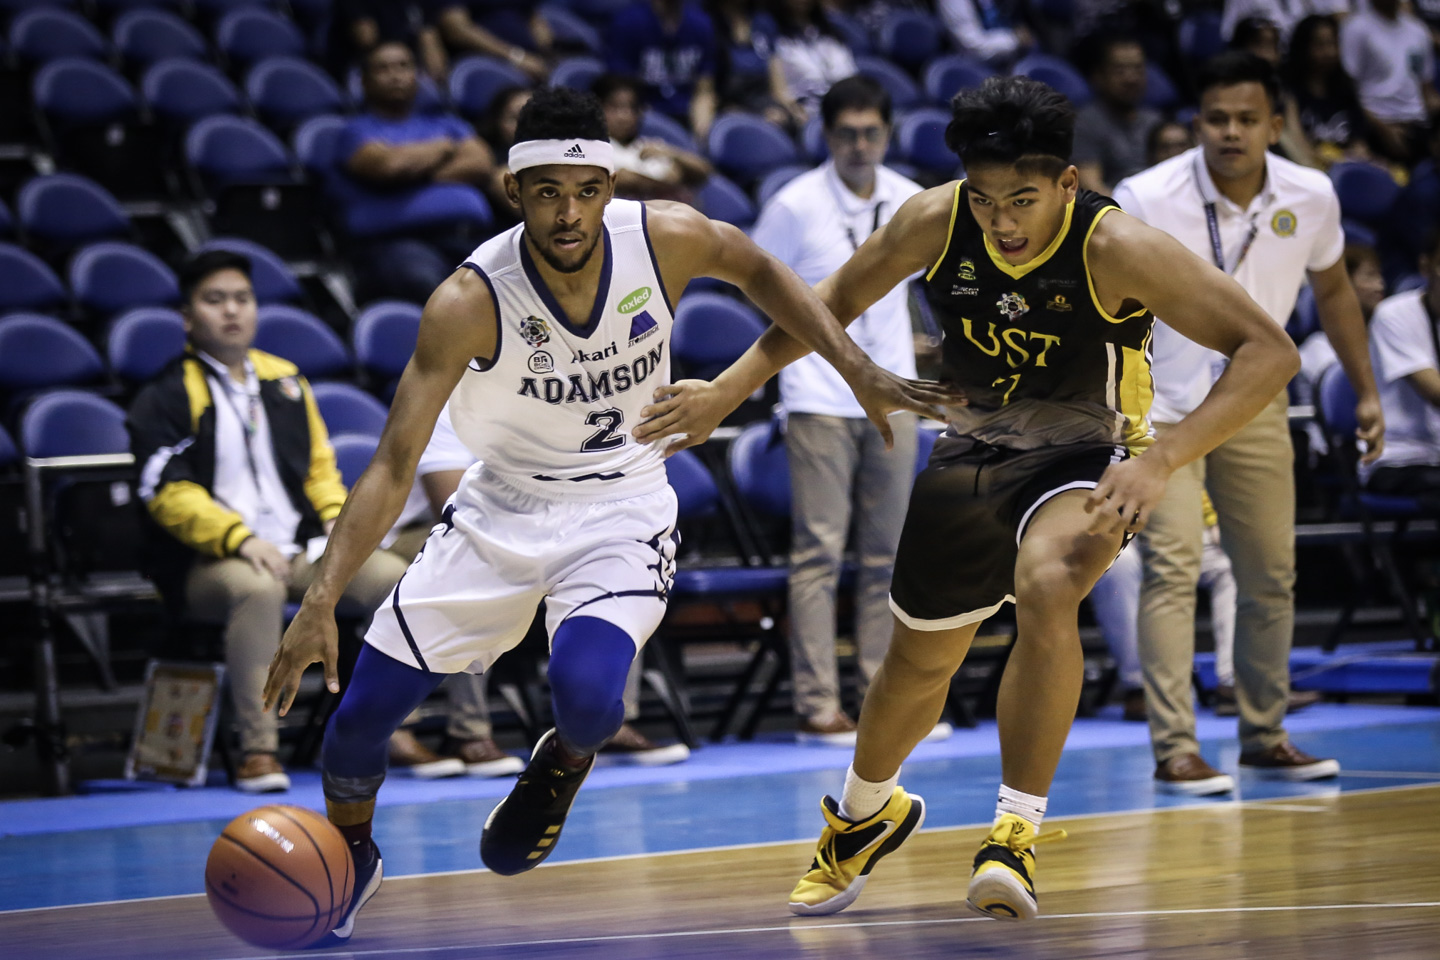 FOCUSED. Jerrick Ahanmisi and the Adamson Falcons go for a crucial 9th win. Photo by Josh Albelda/Rappler 